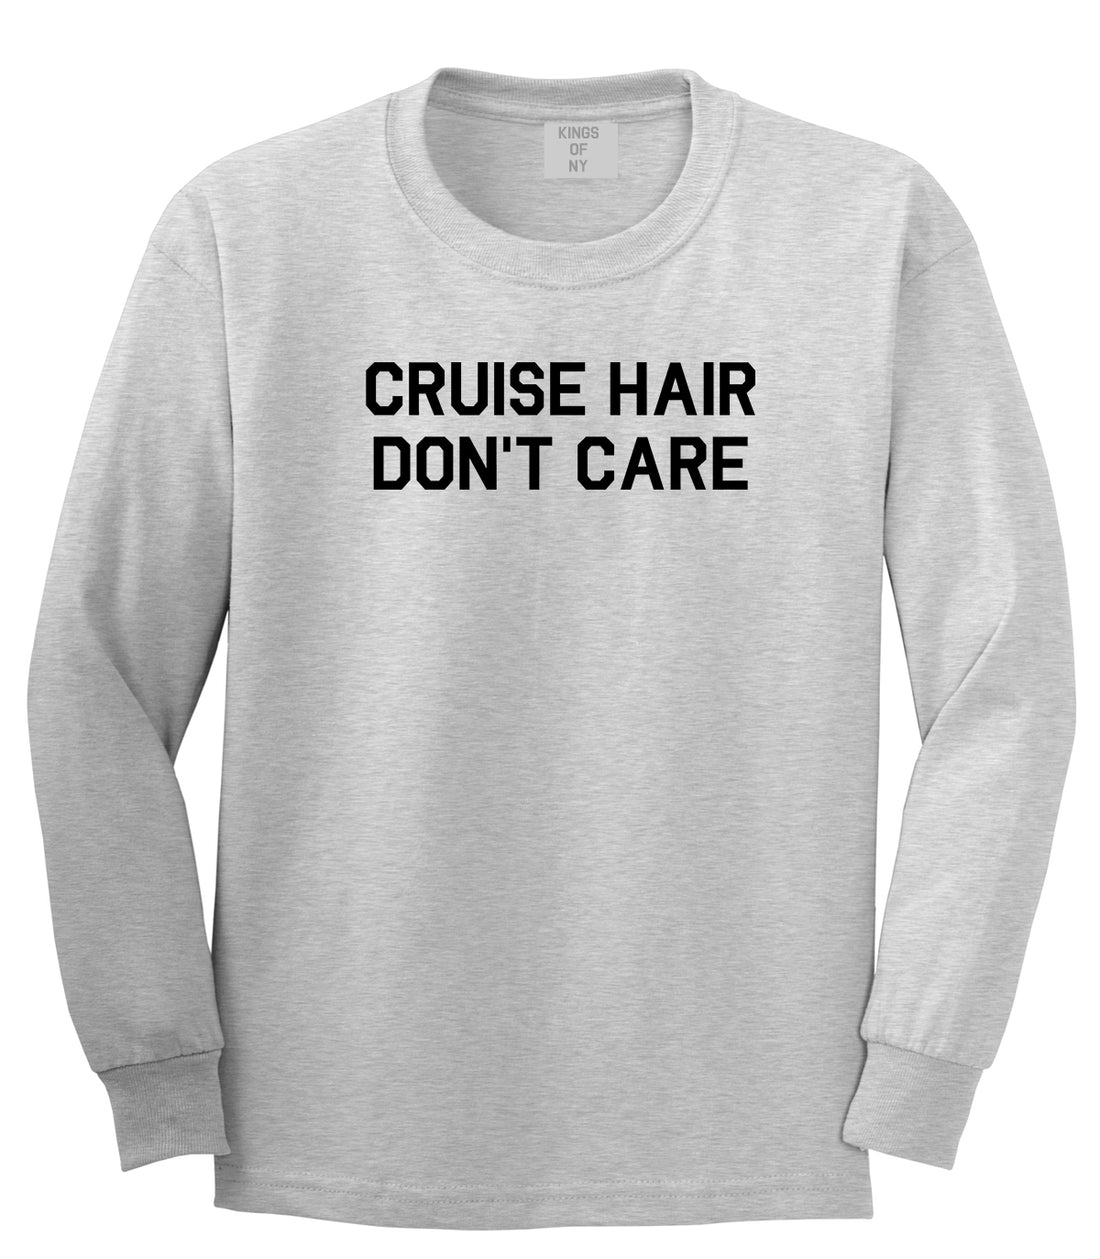 Cruise Hair Dont Care Mens Grey Long Sleeve T-Shirt by Kings Of NY